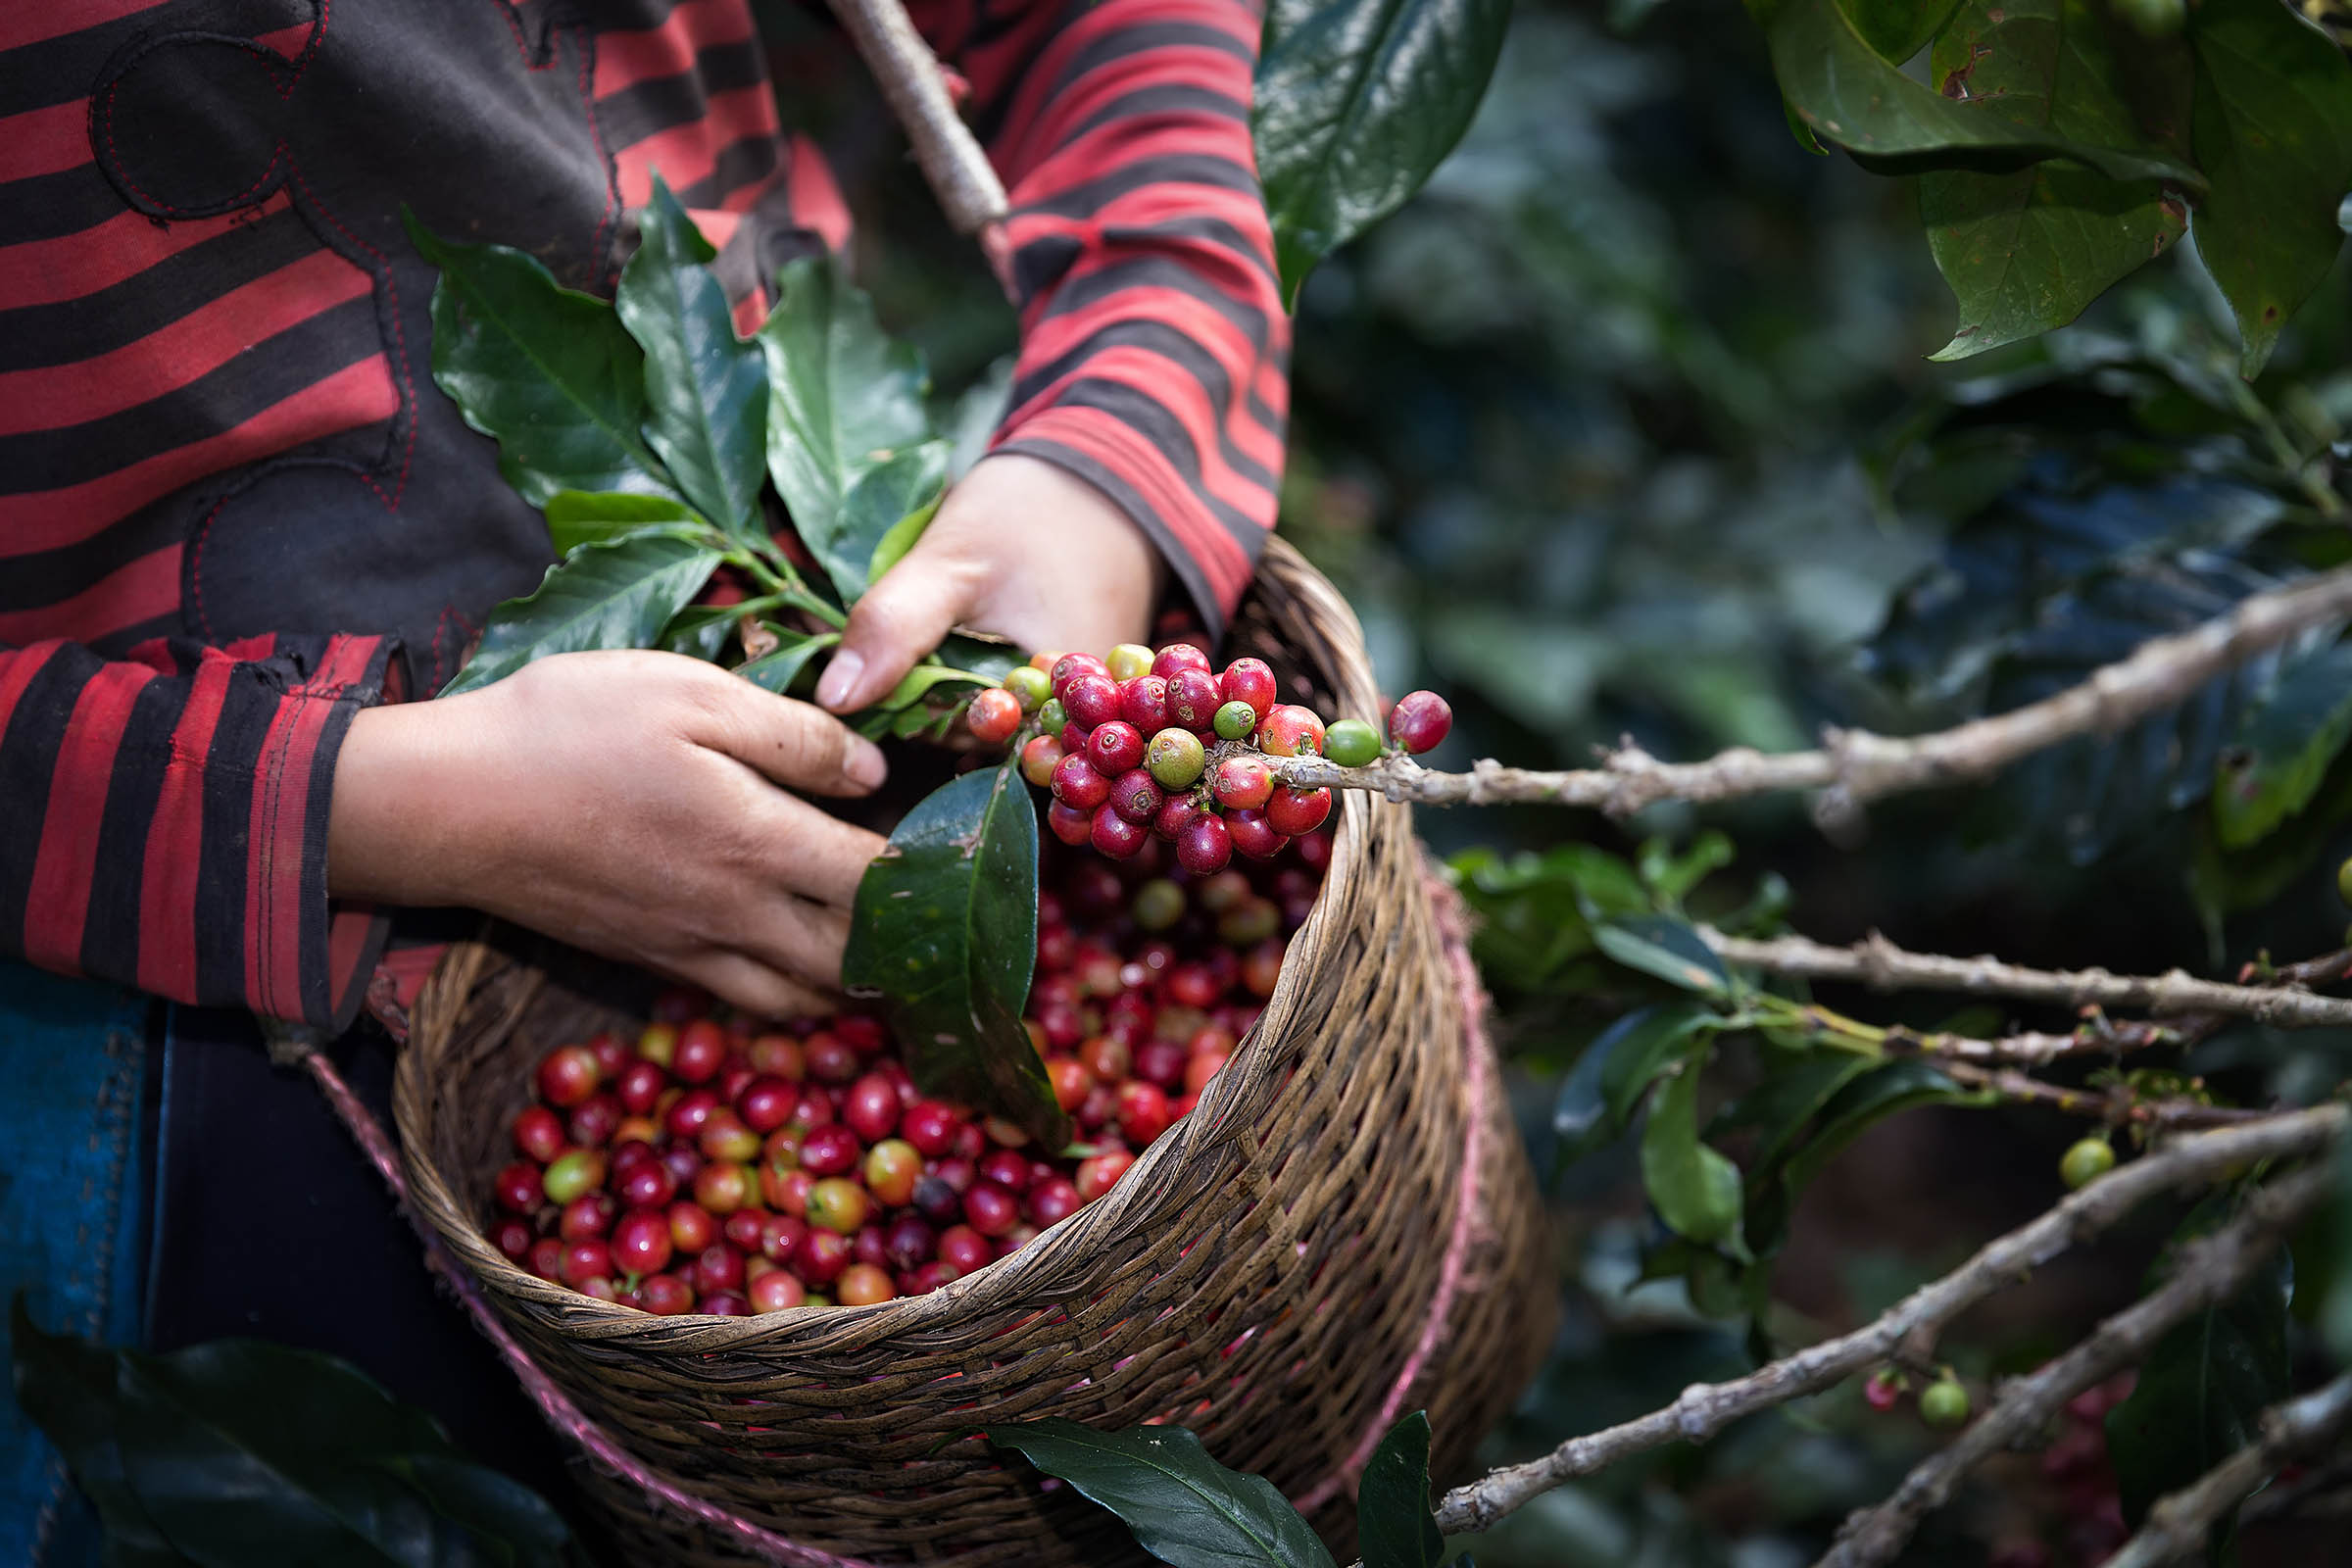 A person harvesting coffee berries from the branch